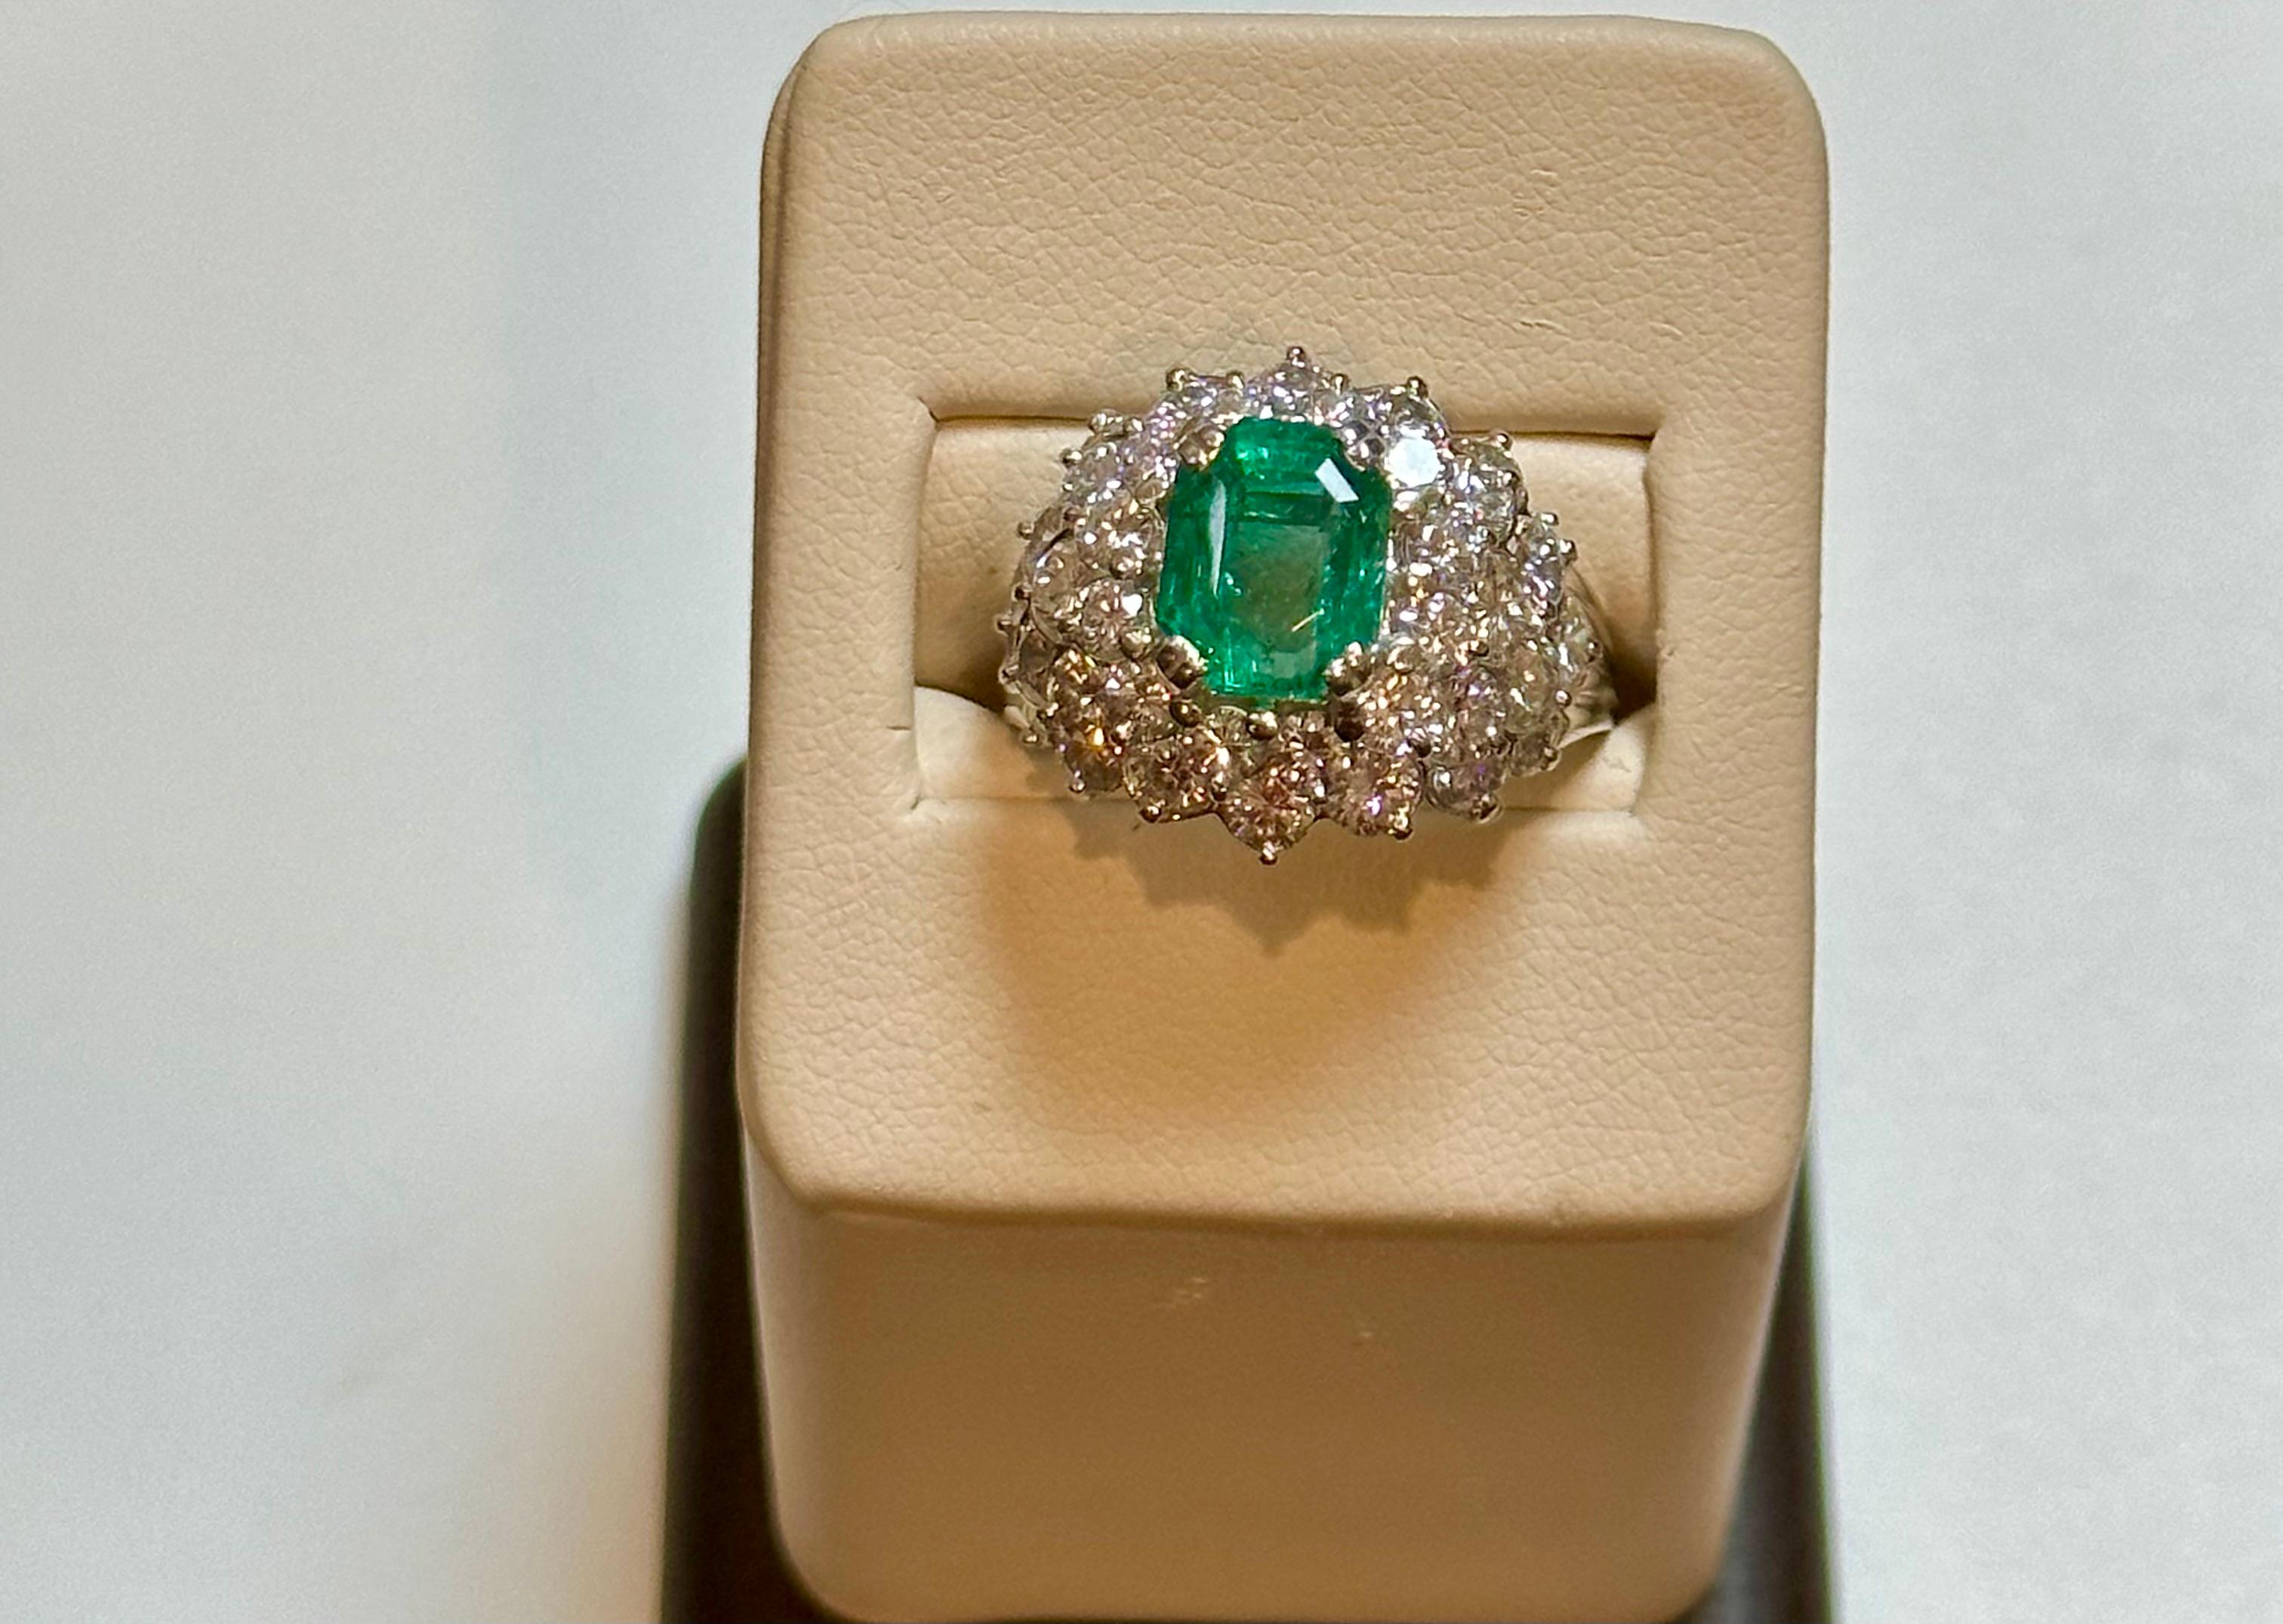 GIA Certified 2.5ct Emerald Cut Colombian Emerald Diamond Ring 18kt White Gold In Excellent Condition For Sale In New York, NY